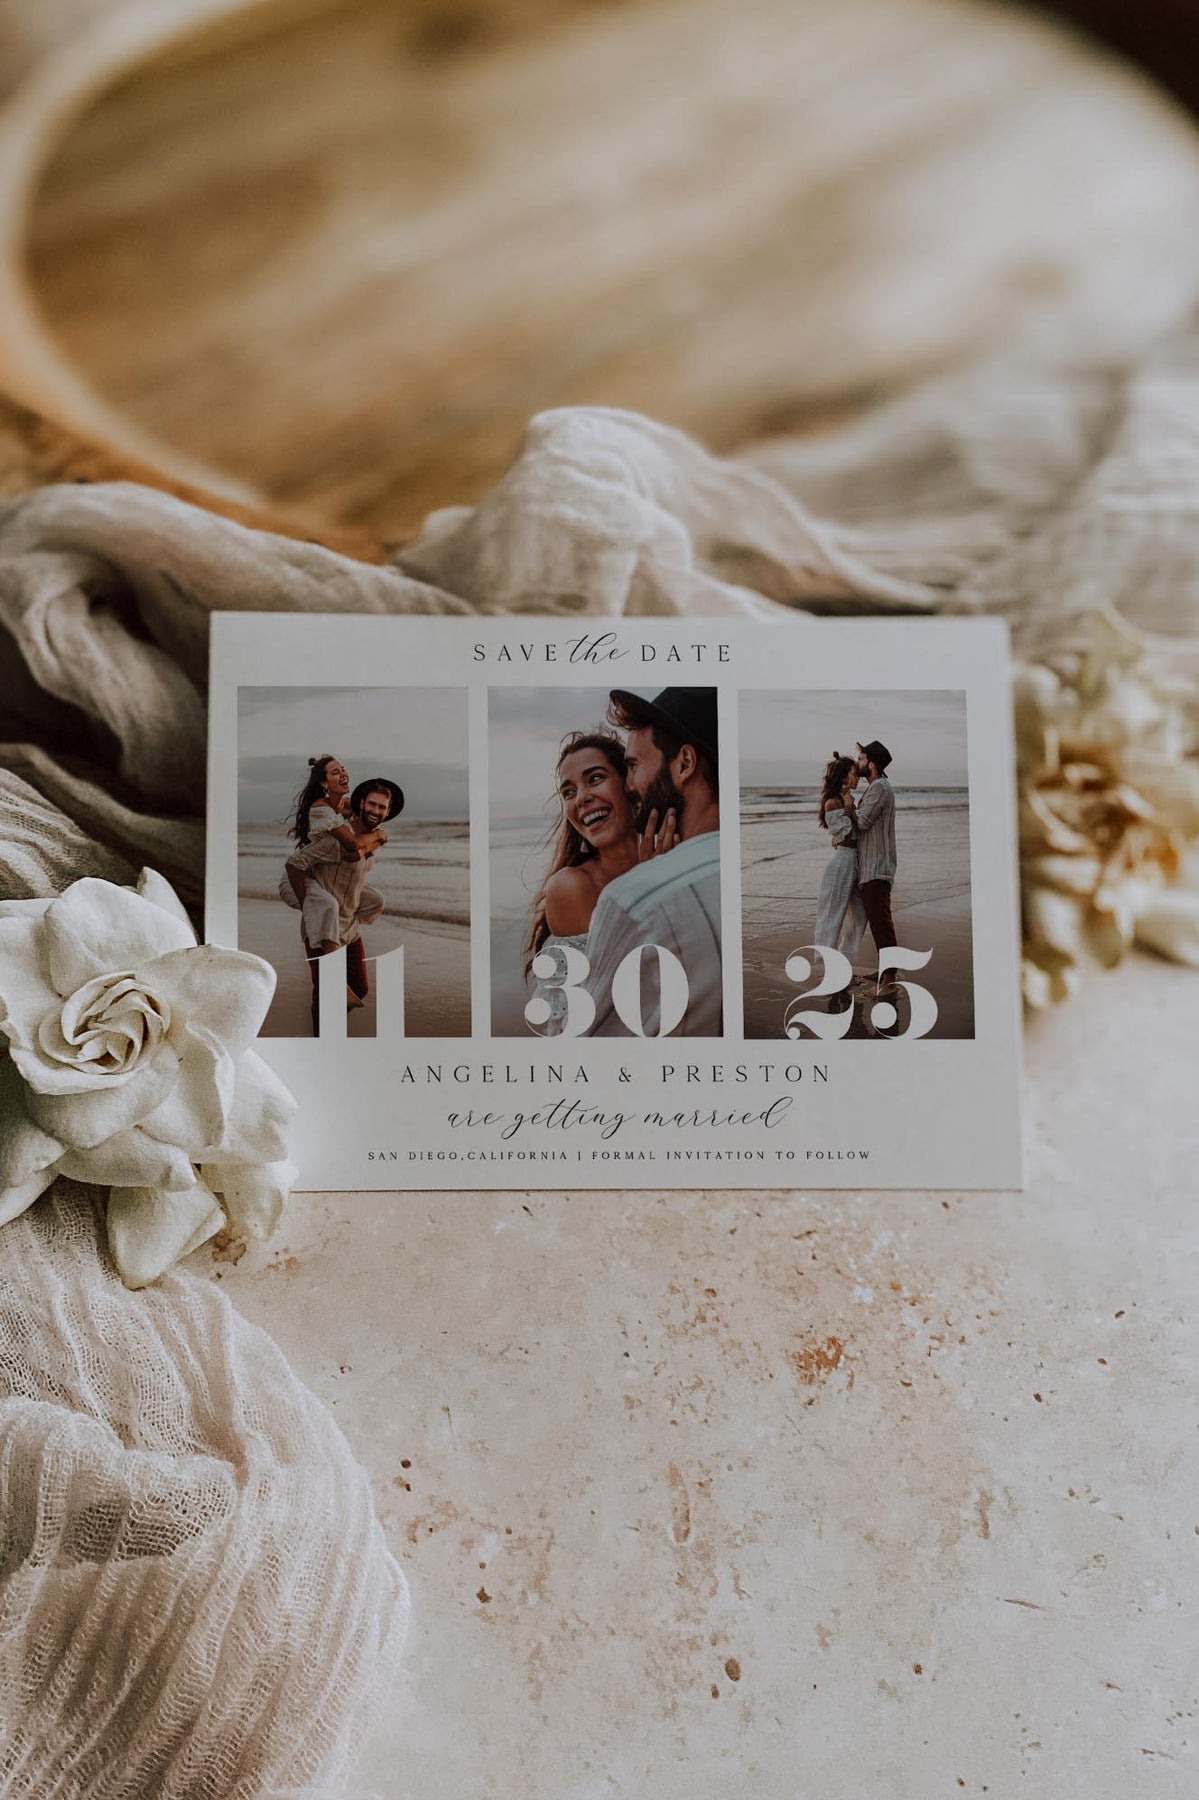 Save the Date Card, Printable Save the Date Template, Wedding Save